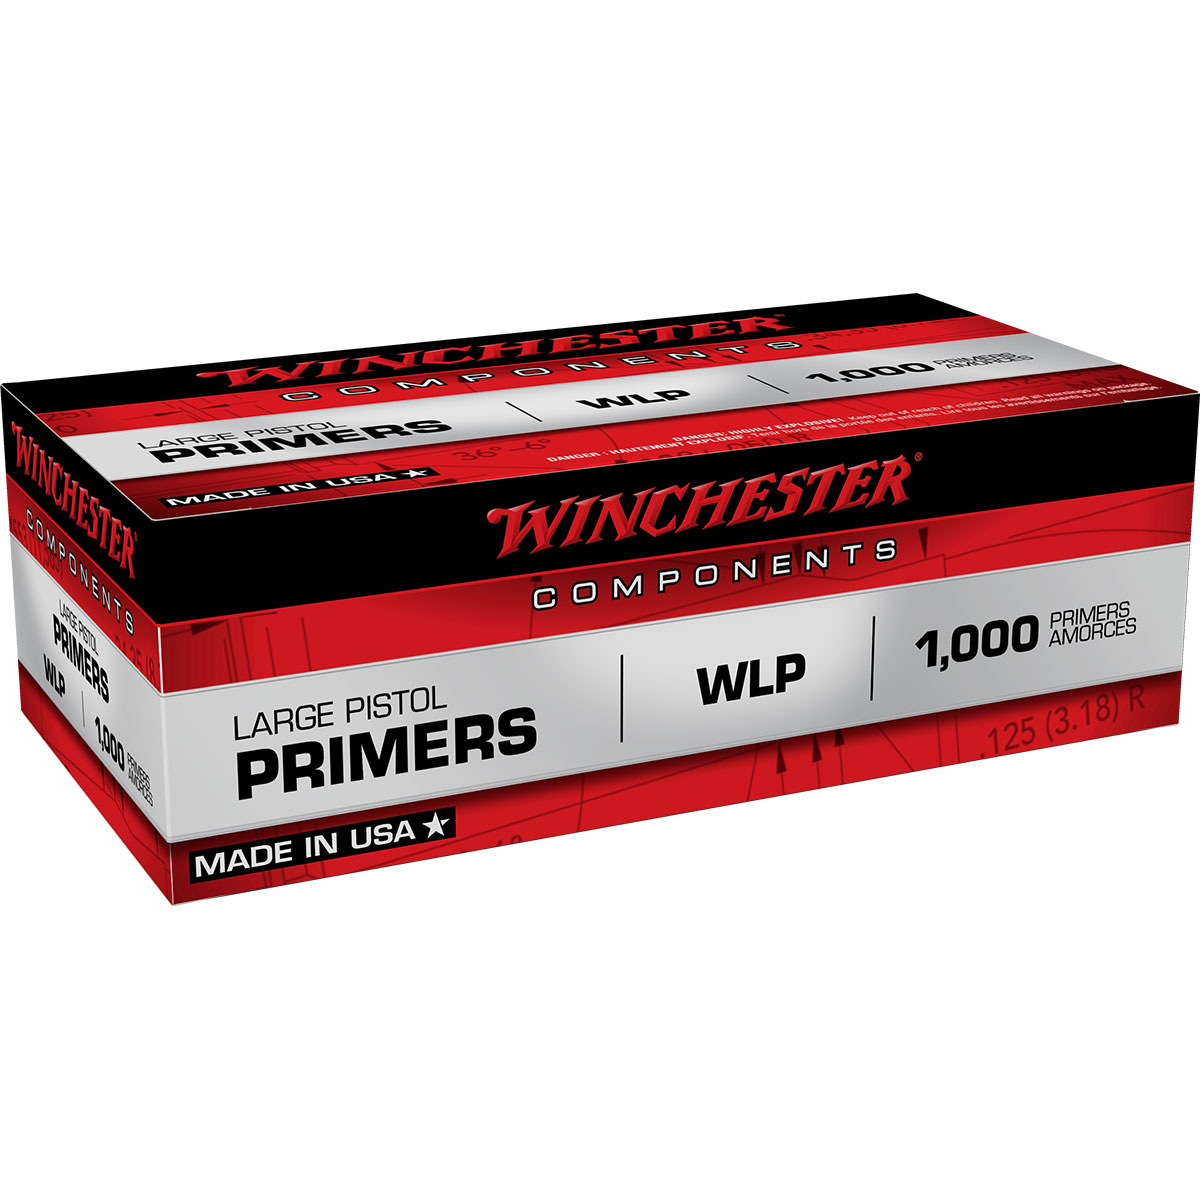 WINCHESTER - LARGE PISTOL PRIMERS